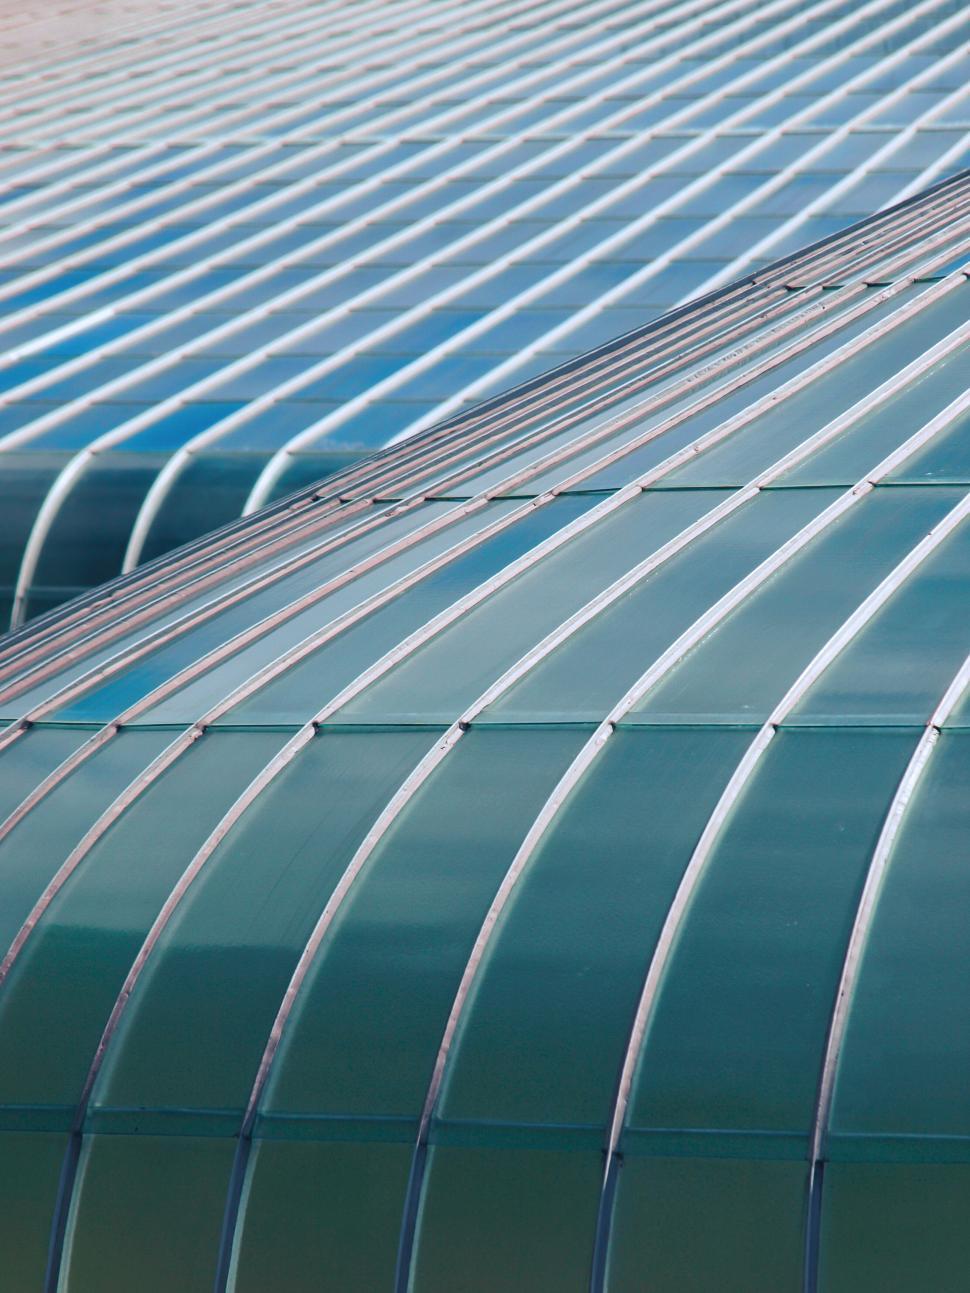 Free Image of Abstract view of teal architectural glass curves 